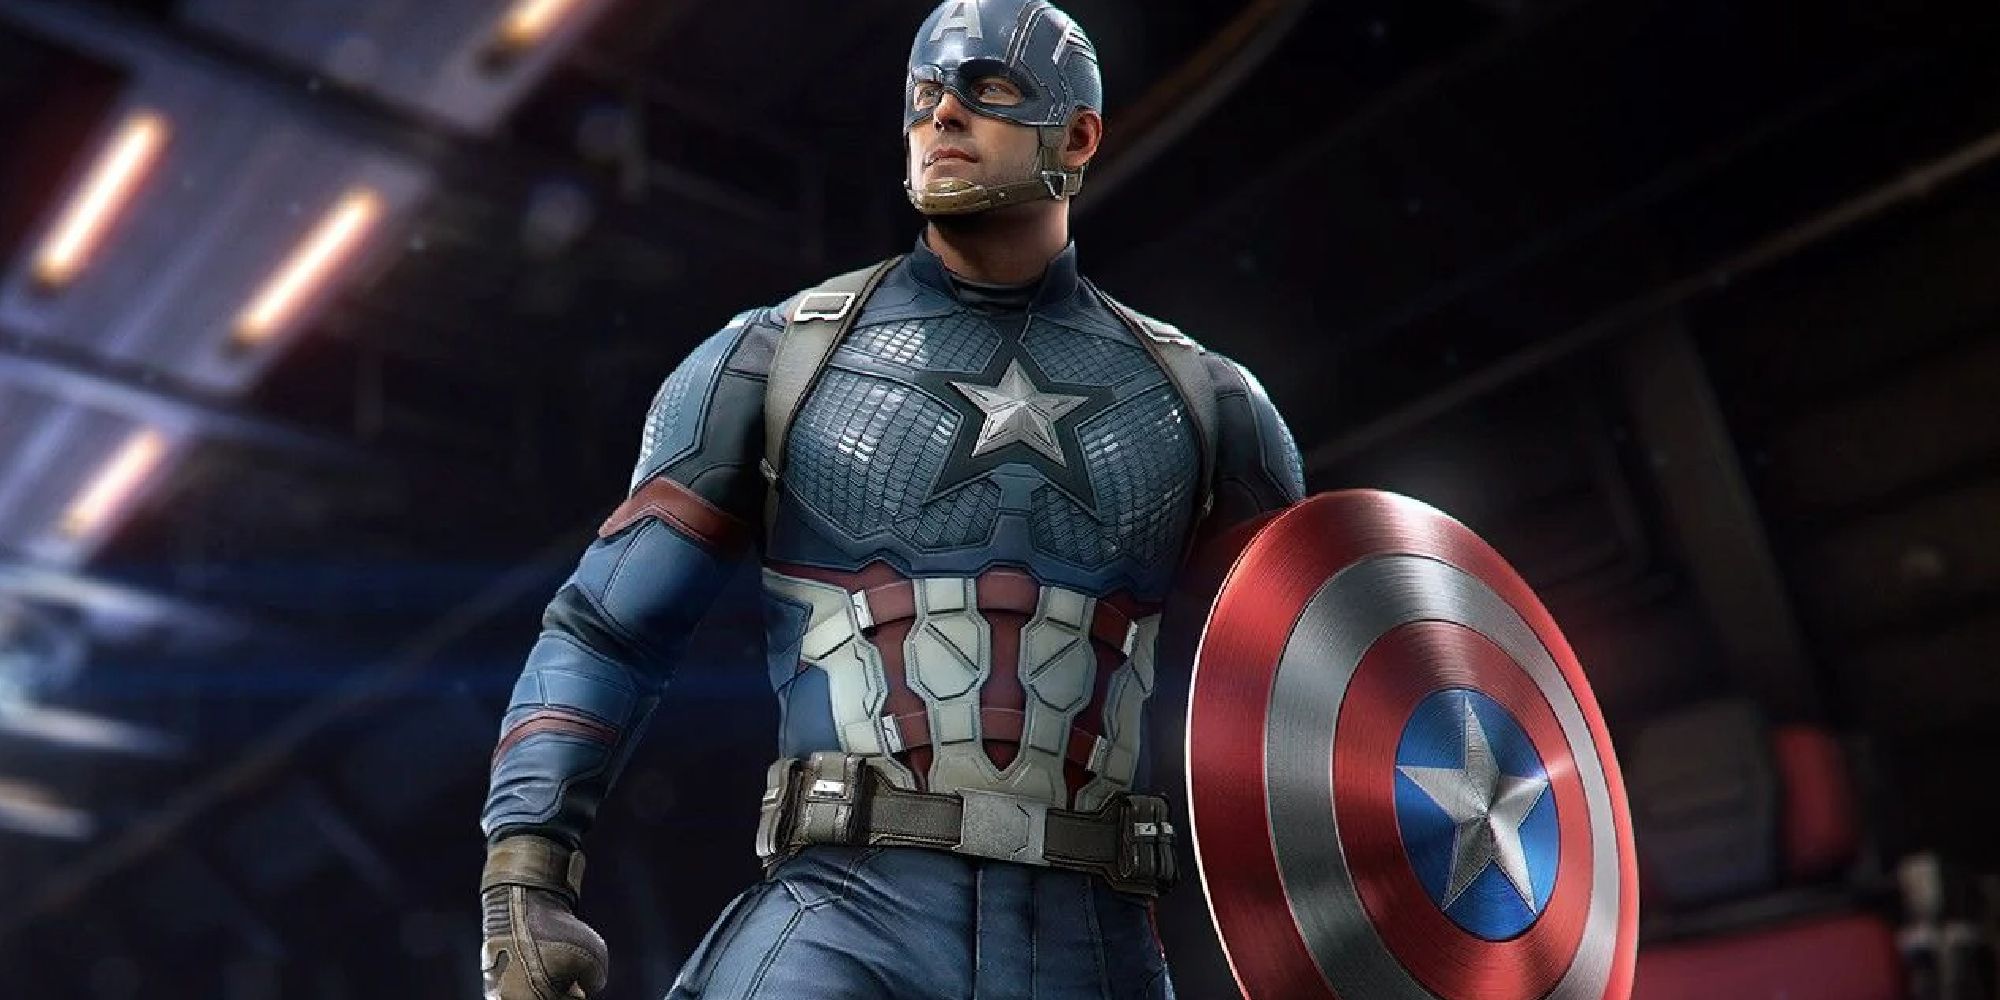 Captain America wielding his vibranium shield in The Avengers for PS4